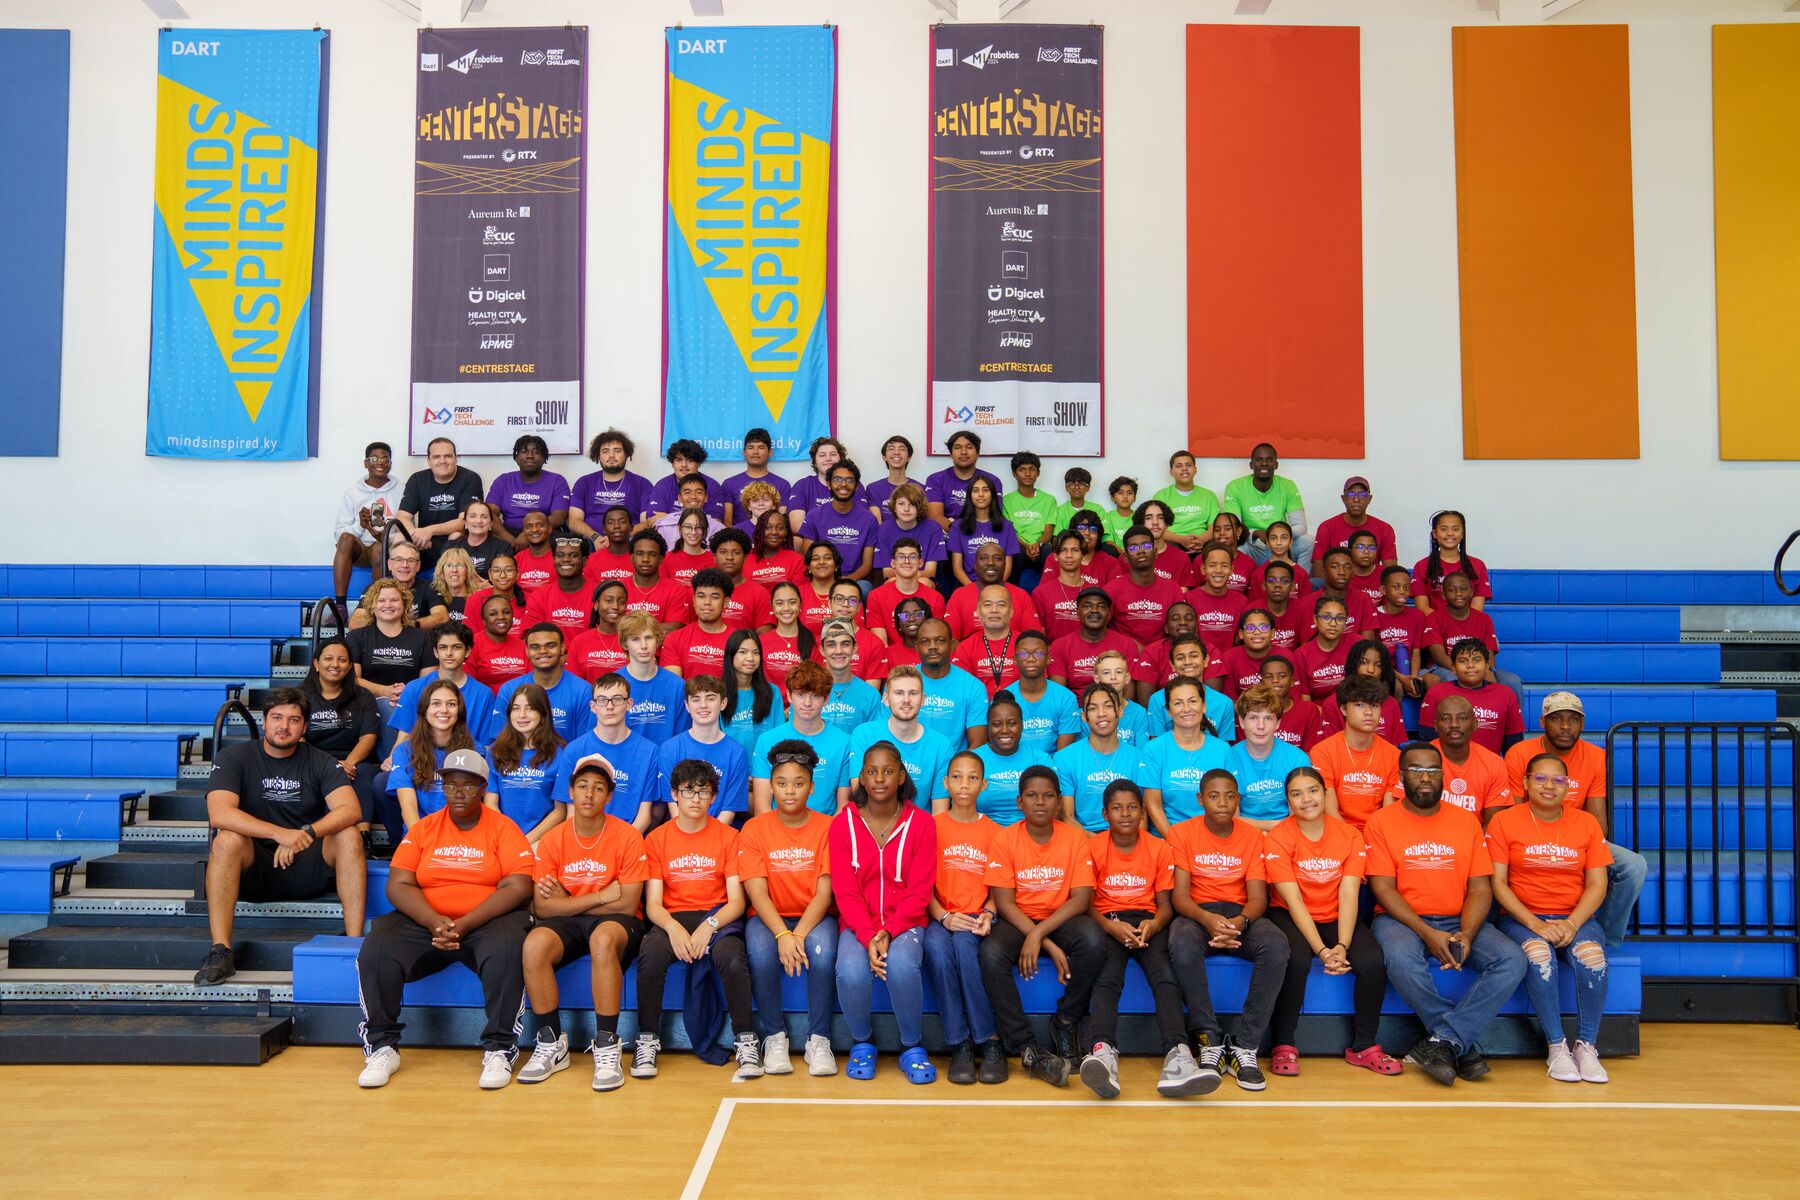 Group shot of participating schools